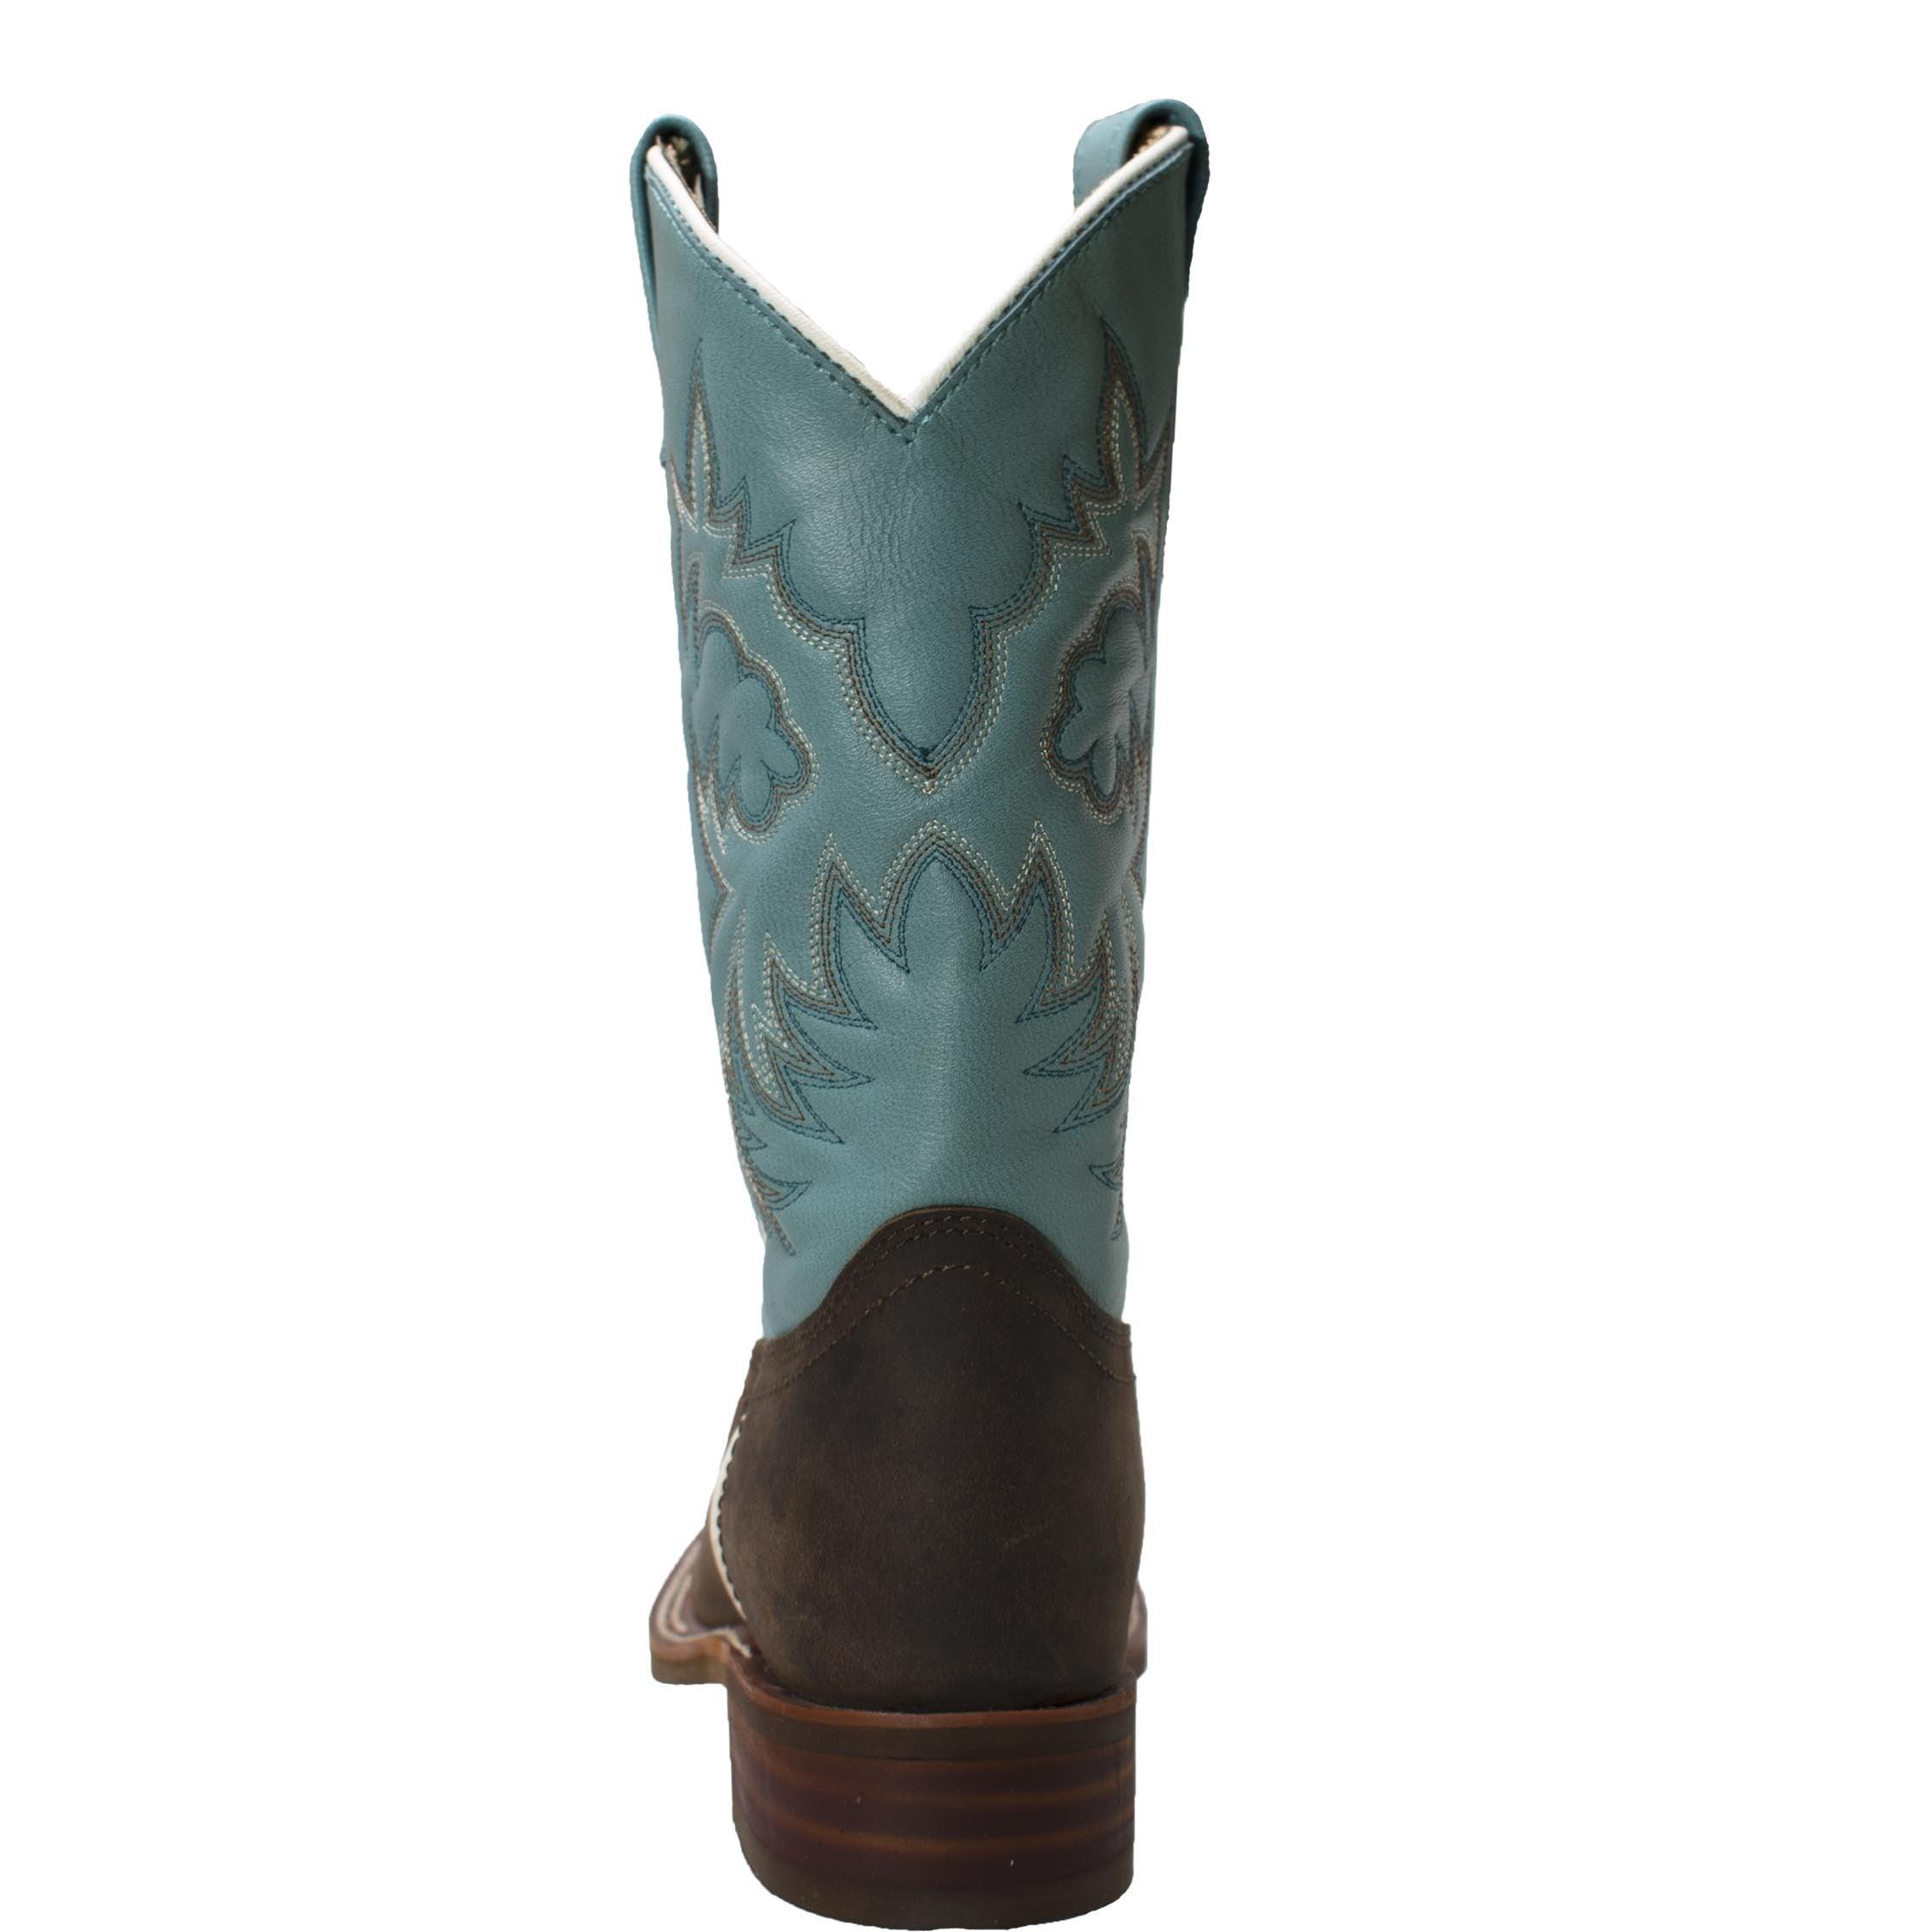 AdTec Women's 11" Western Square Toe Boots Brown/Turquoise - Flyclothing LLC